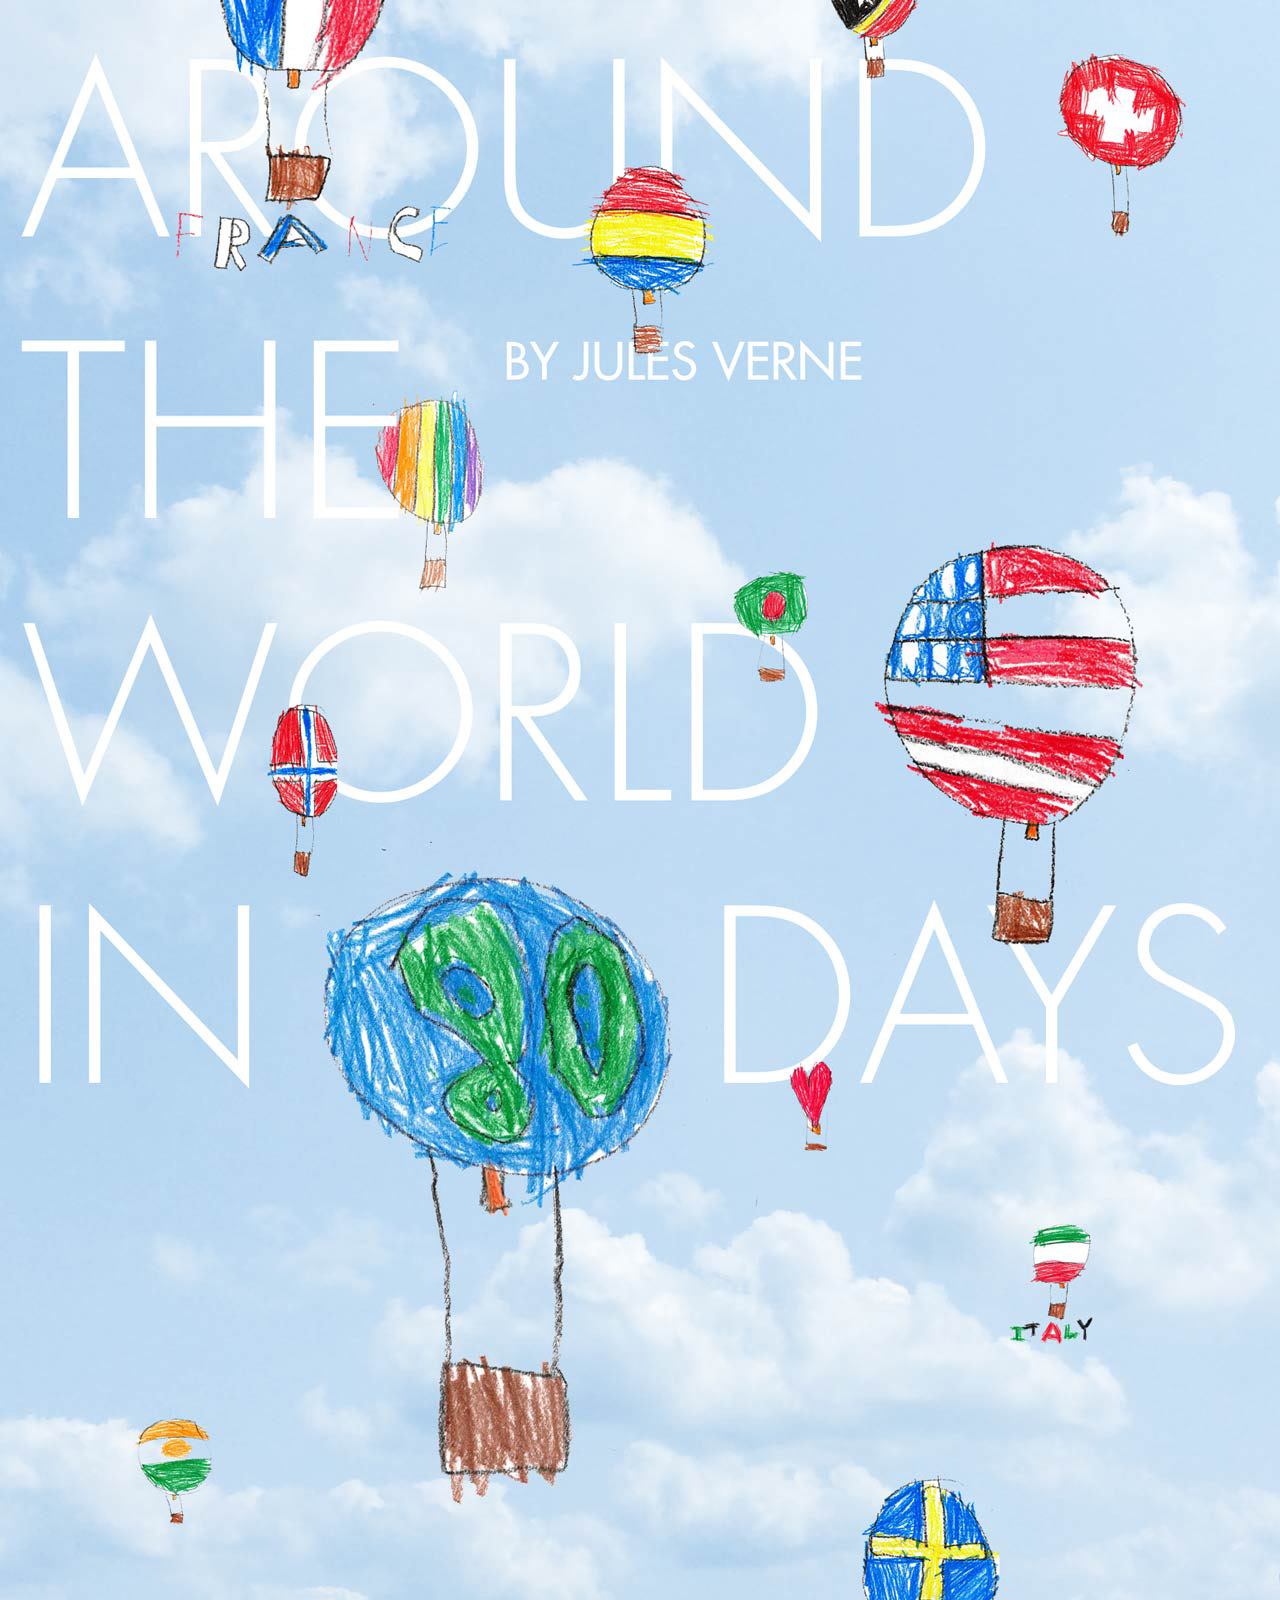 Ethan & Amy Fidler | "Around the World in 80 Days" by Jules Verne